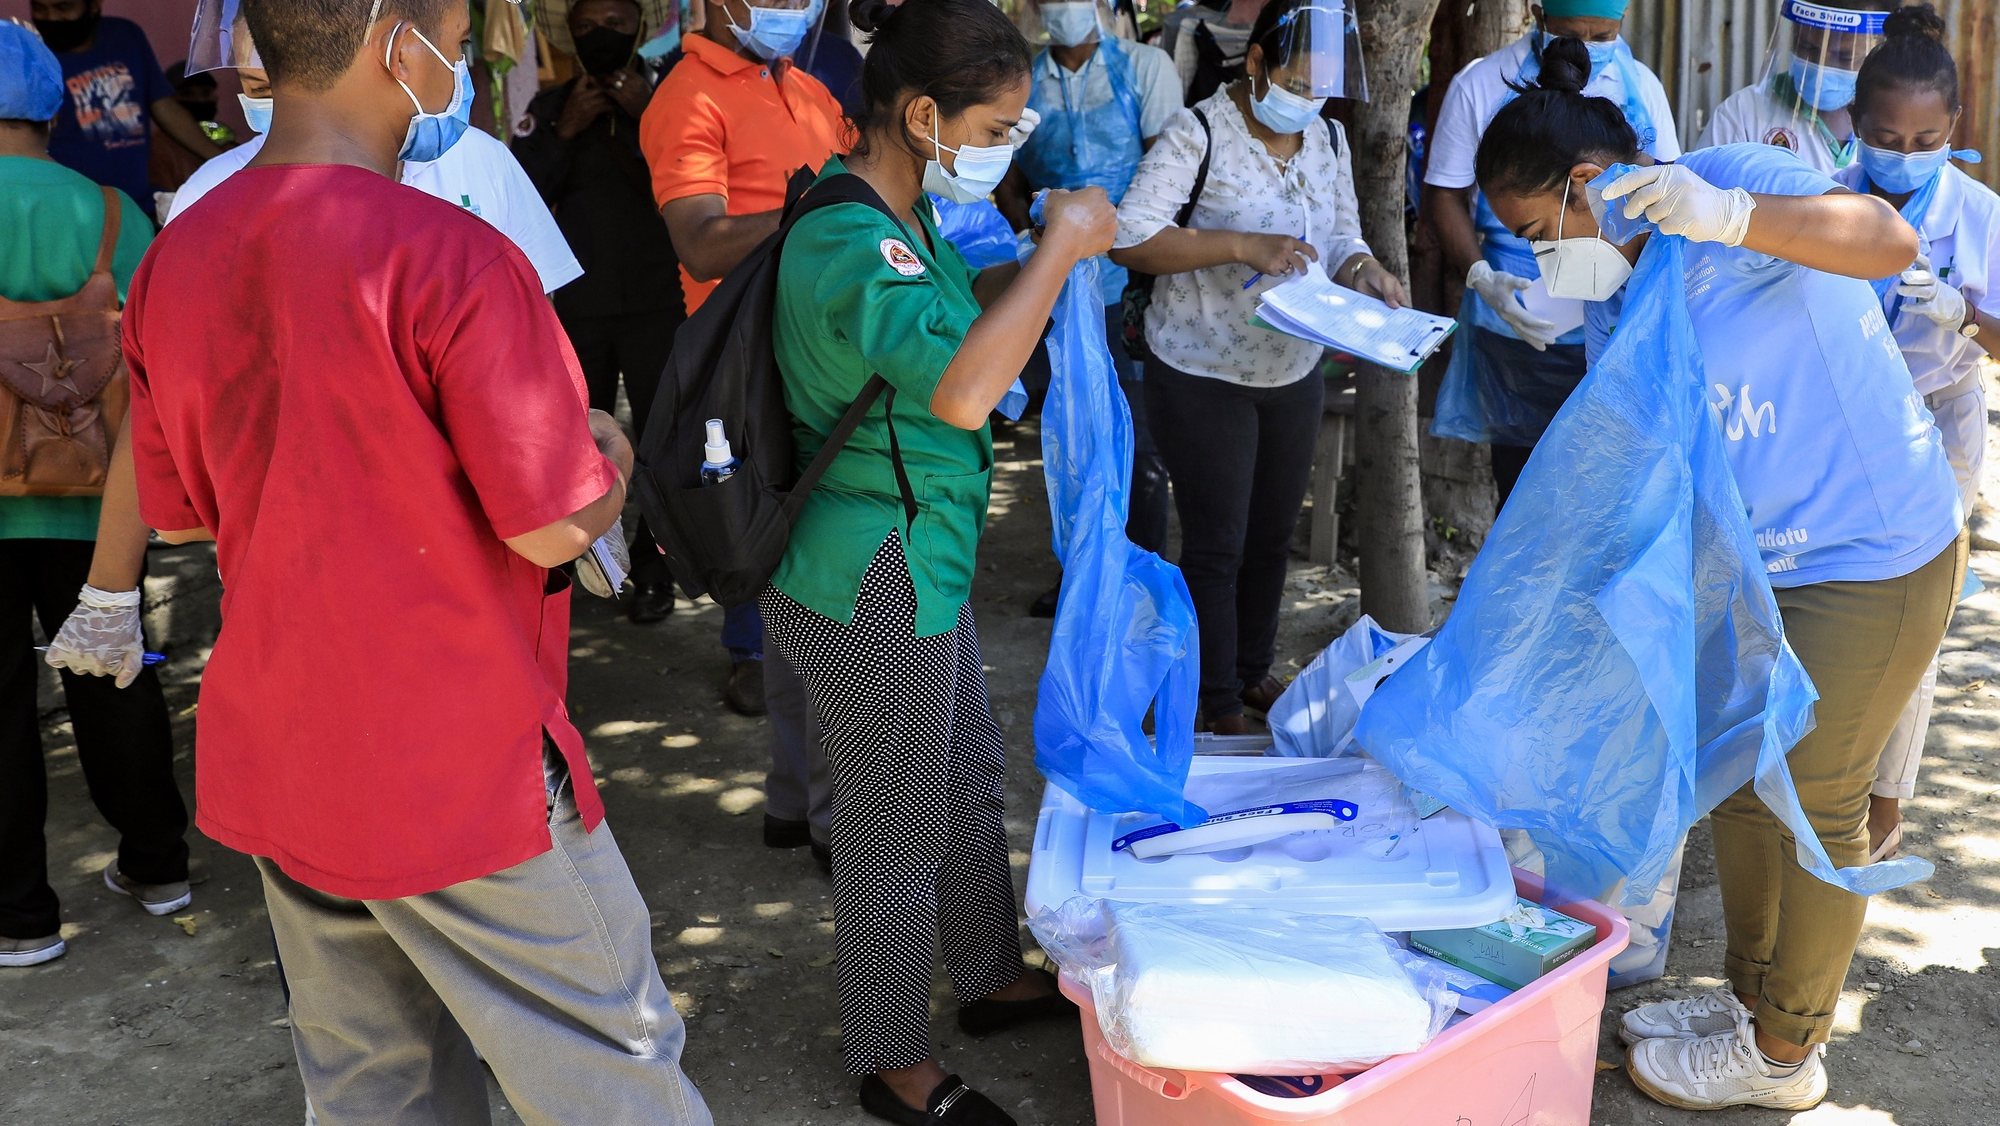 epa09079360 Healthcare workers prepare for a COVID-19 swab test in Dili, East Timor, also known as Timor Leste, 17 March 2021. With less than 300 COVID-19 cases and zero deaths, Timor Leste recorded the second-smallest outbreak in Southeast Asia after Laos. The country imposed a state of emergency a week after the Catholic-majority nation reported its first case on 21 March 2020, and enforced strict border controls.  EPA/ANTONIO DASIPARU